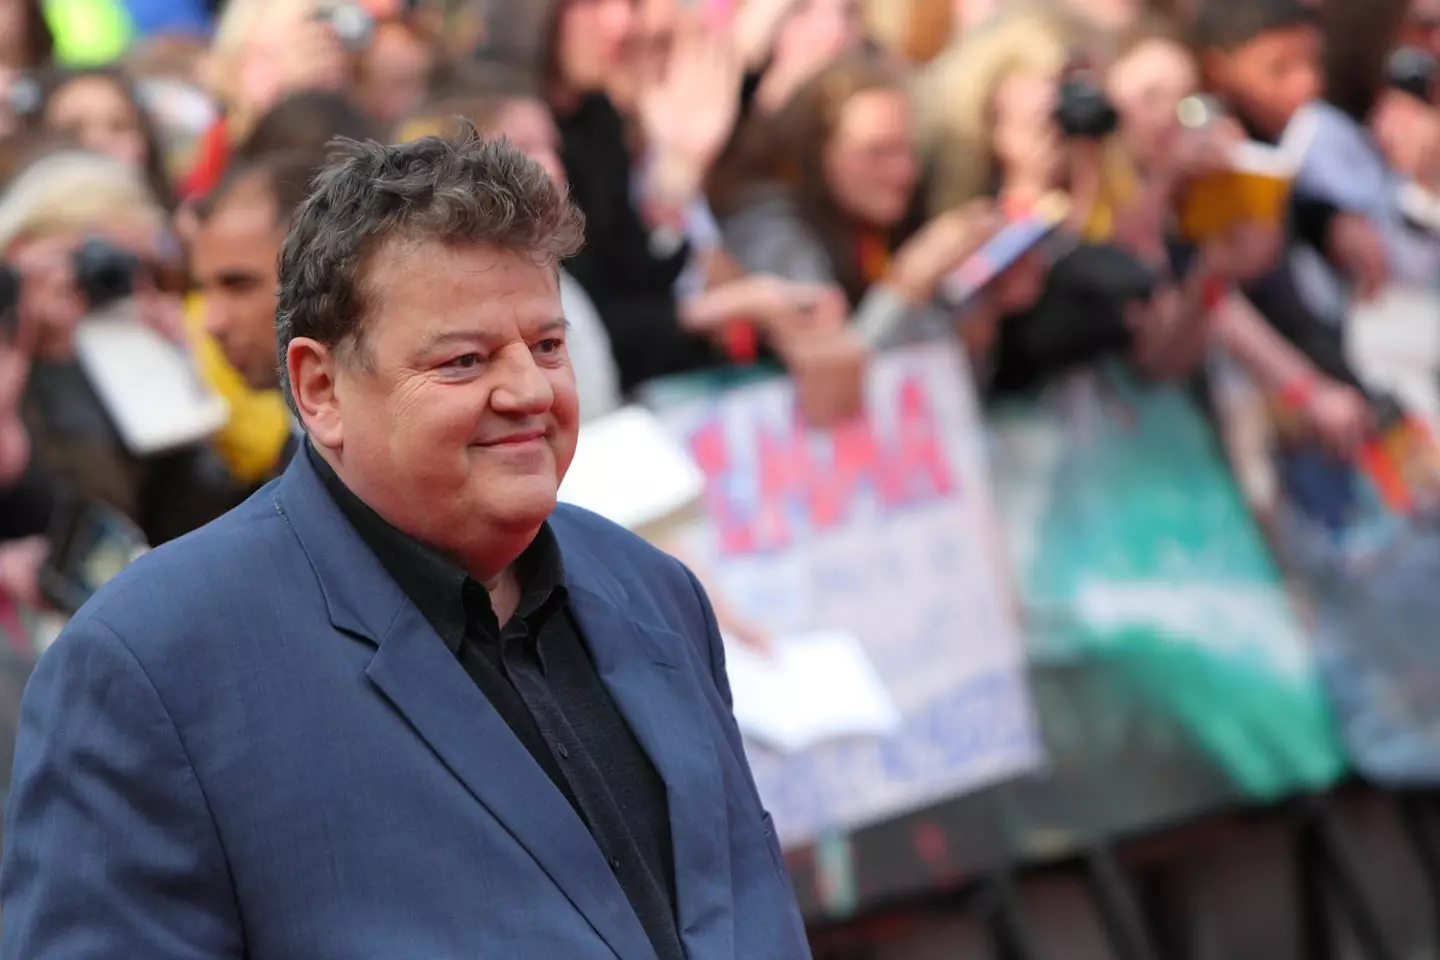 Robbie Coltrane has died at the age of 72.